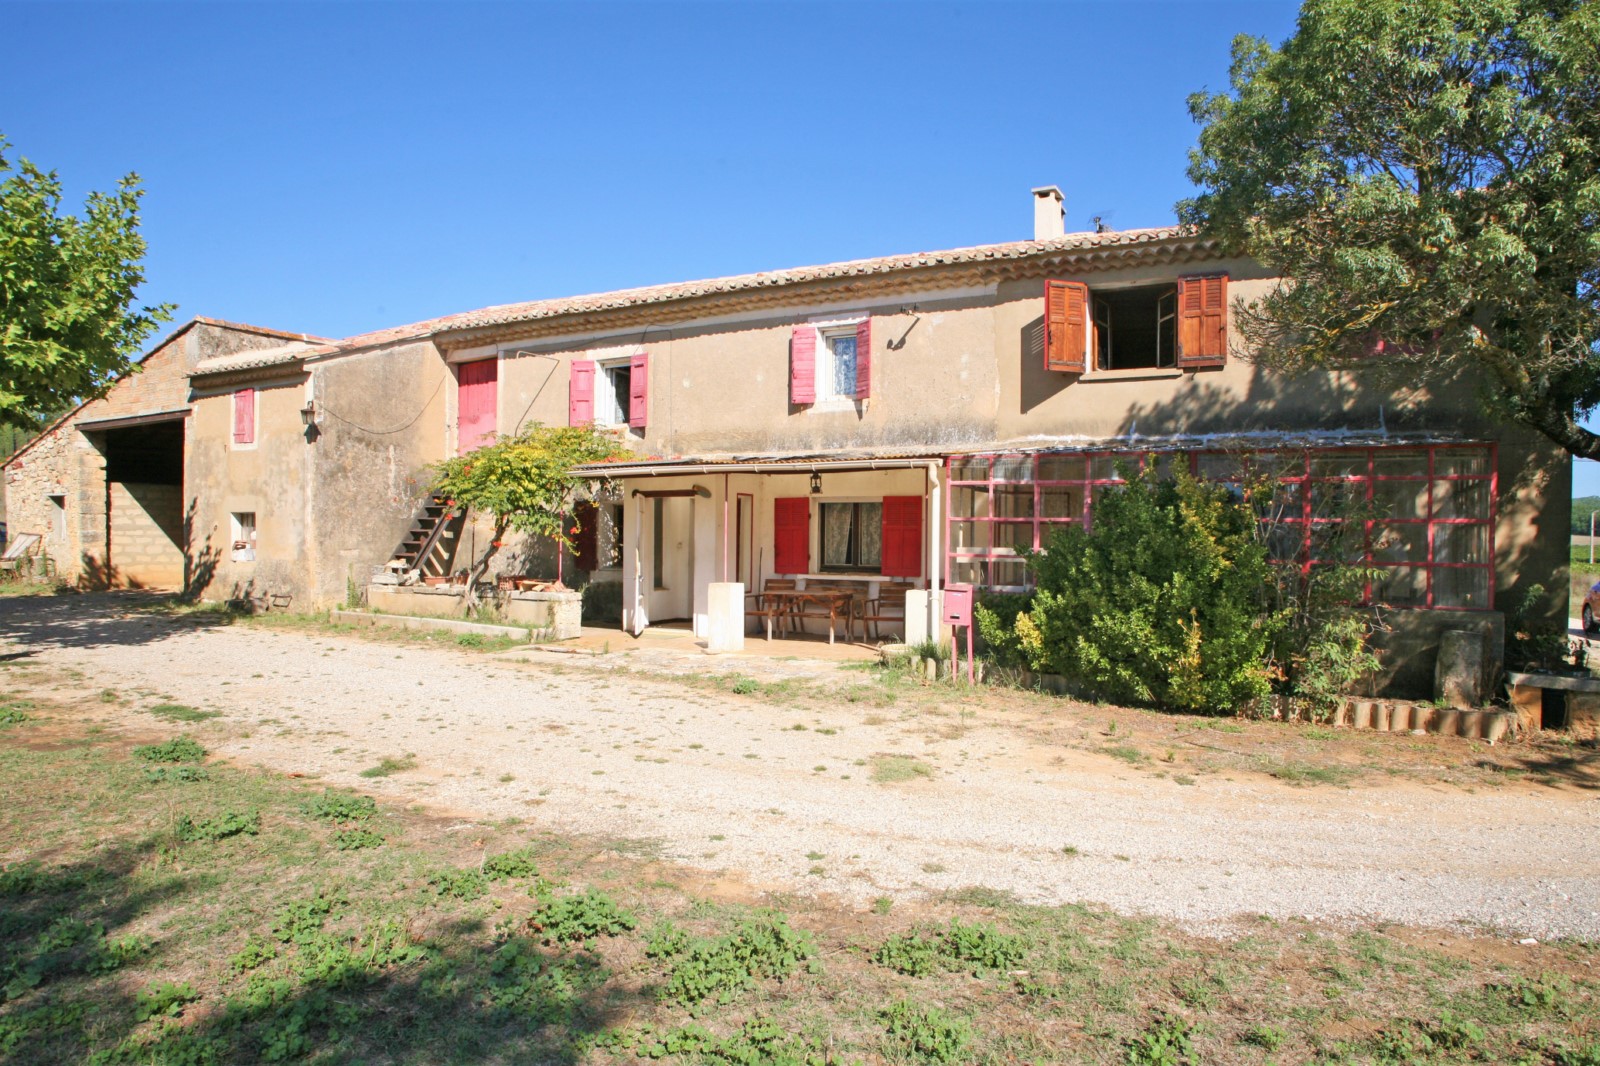 19th century farmhouse on over 6 hectares of land with a beautiful view of the Luberon